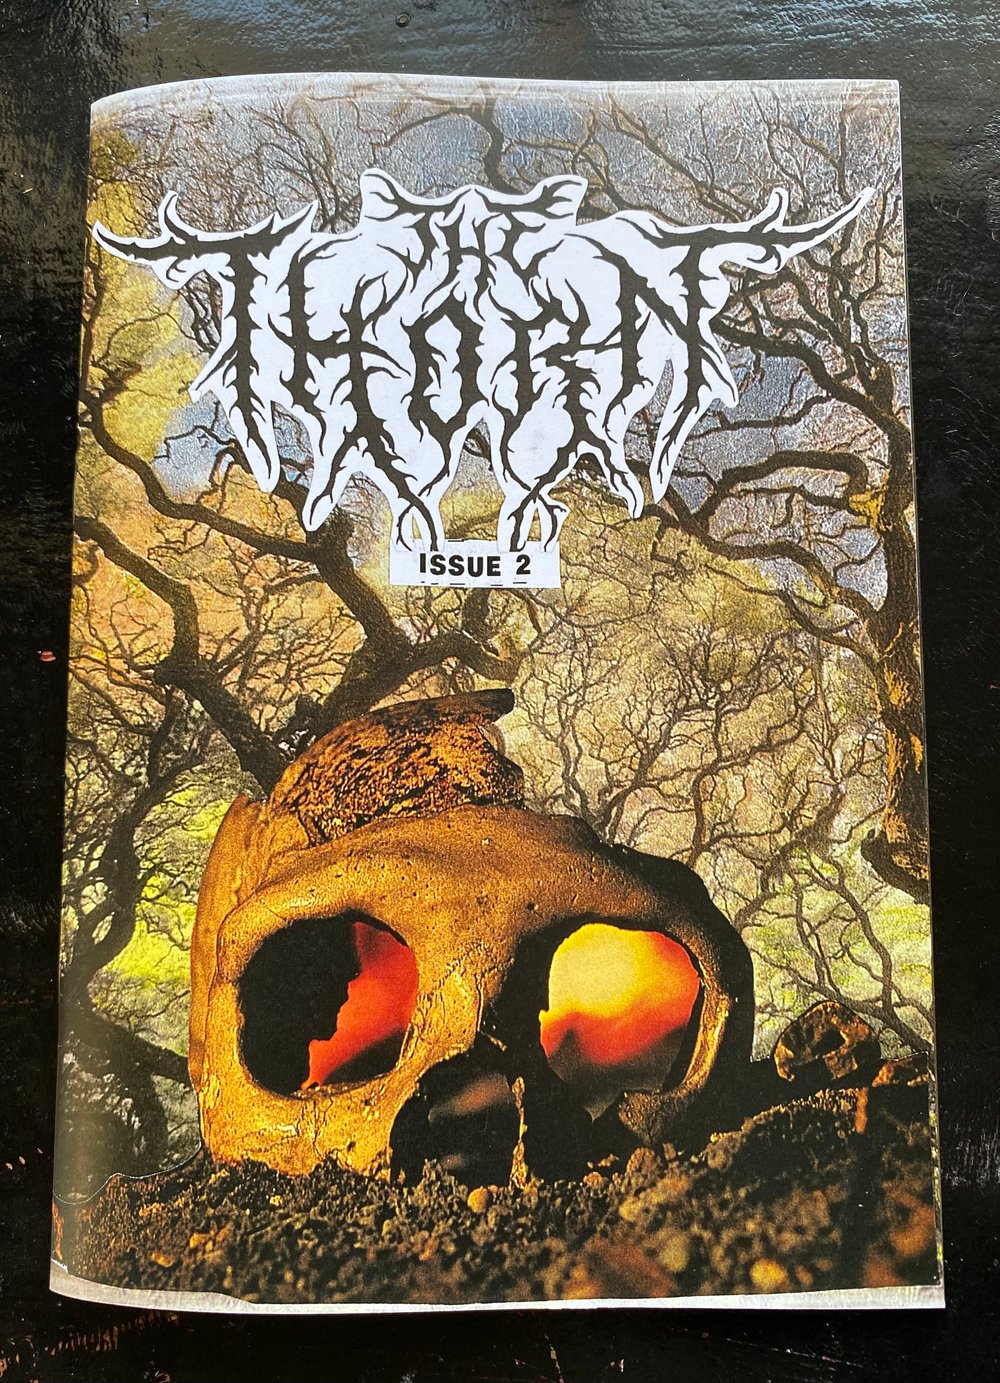 The Thorn Issue 2